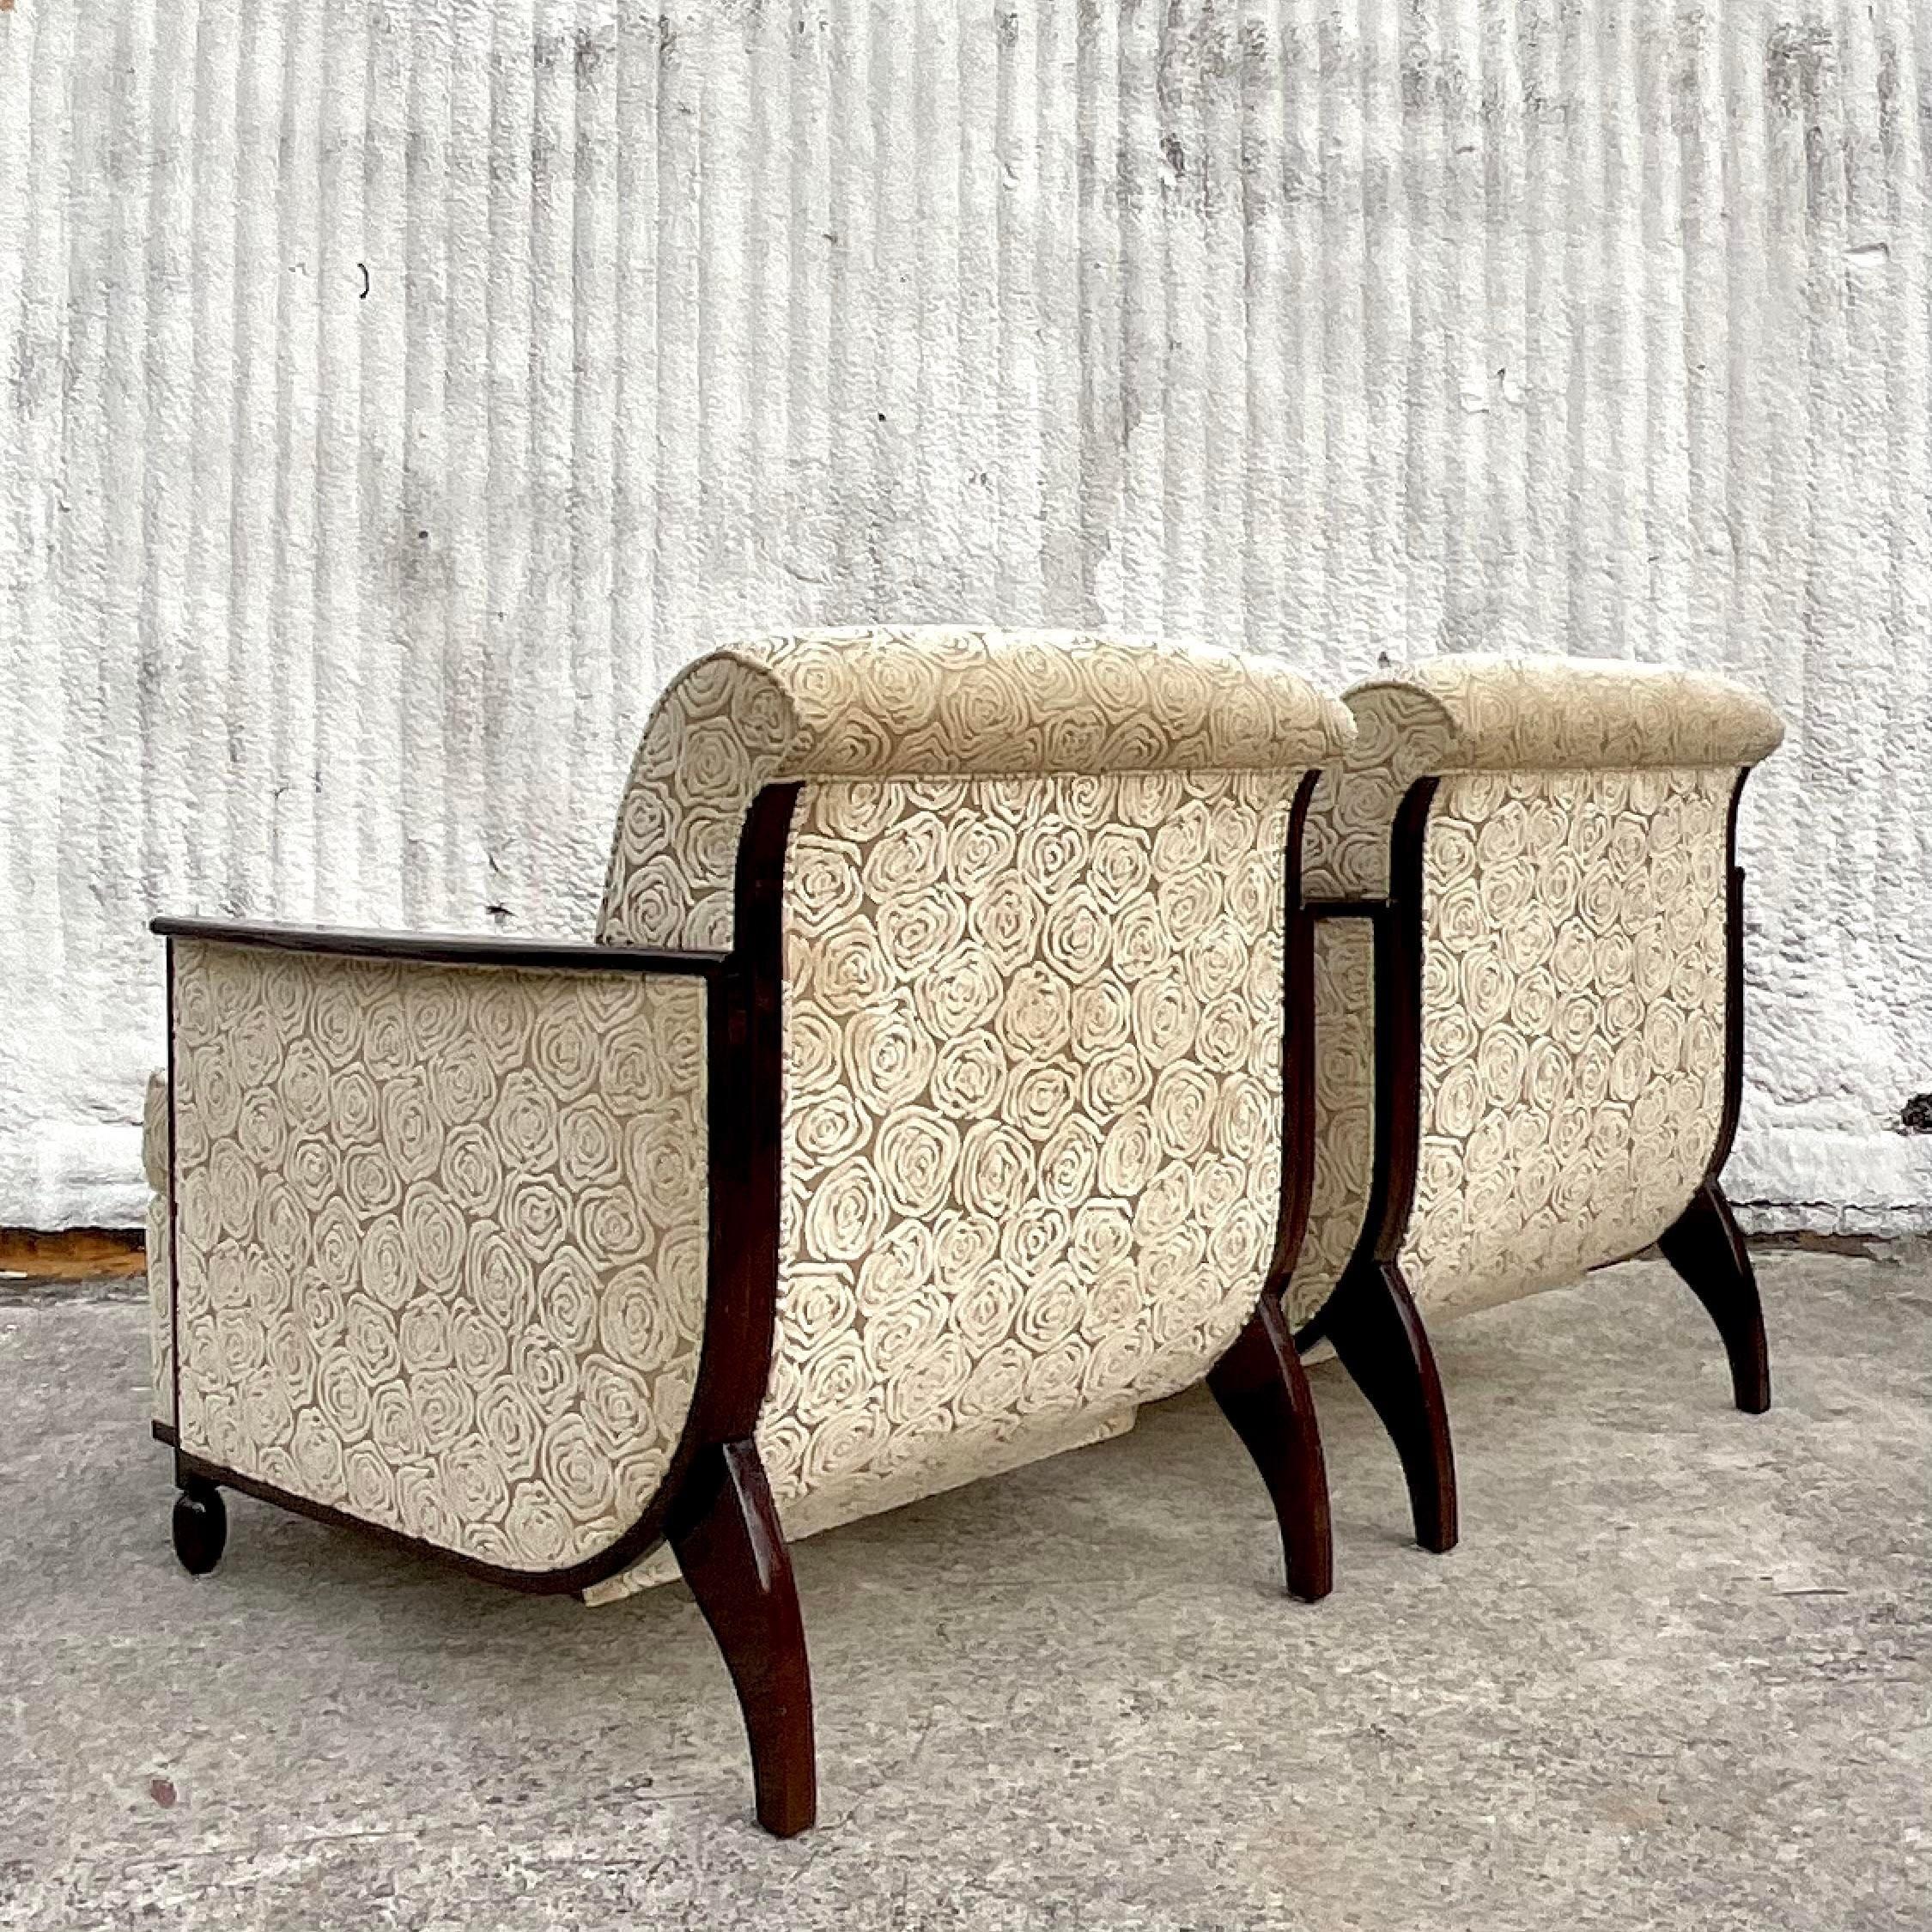 Vintage Custom Geoffrey Bradfield Deco Lounge Chairs - a Pair In Good Condition For Sale In west palm beach, FL